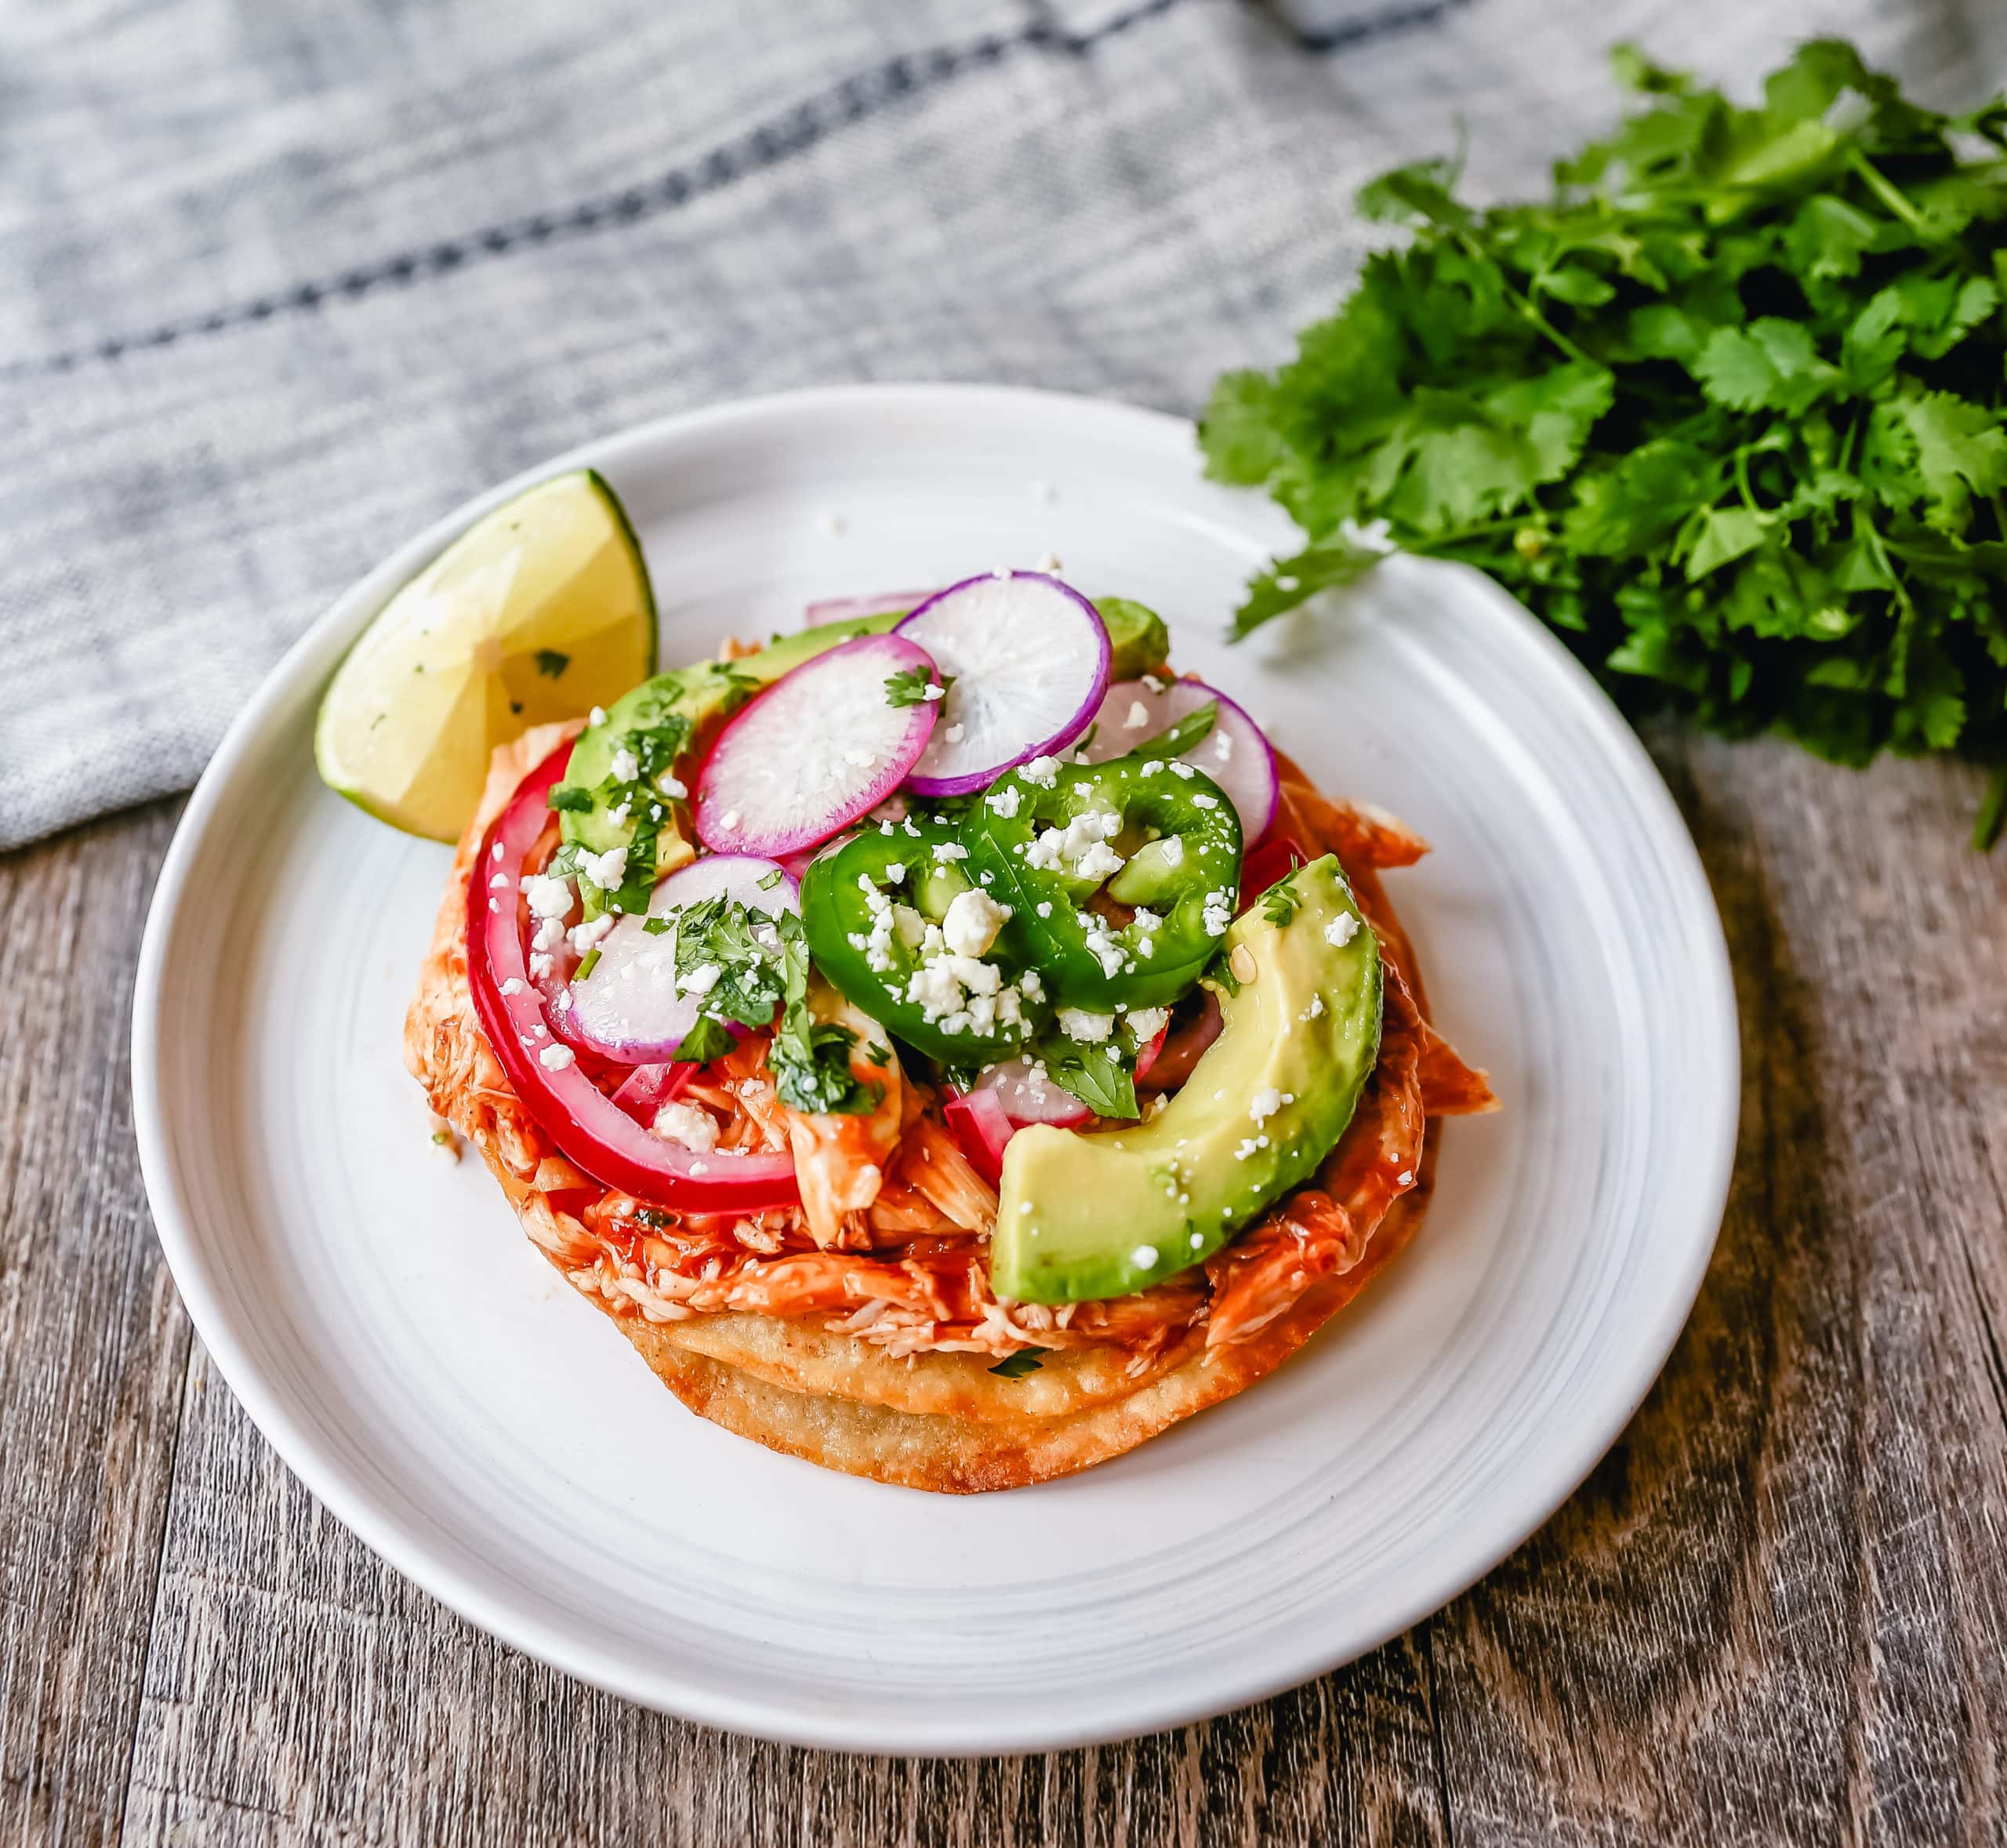 Chicken Tostadas Chile Chicken Tostadas made with homemade tostada shells topped with chile spiced chicken topped with cotija cheese, cilantro, pickled red onion, fresh avocado, and jalapeños.